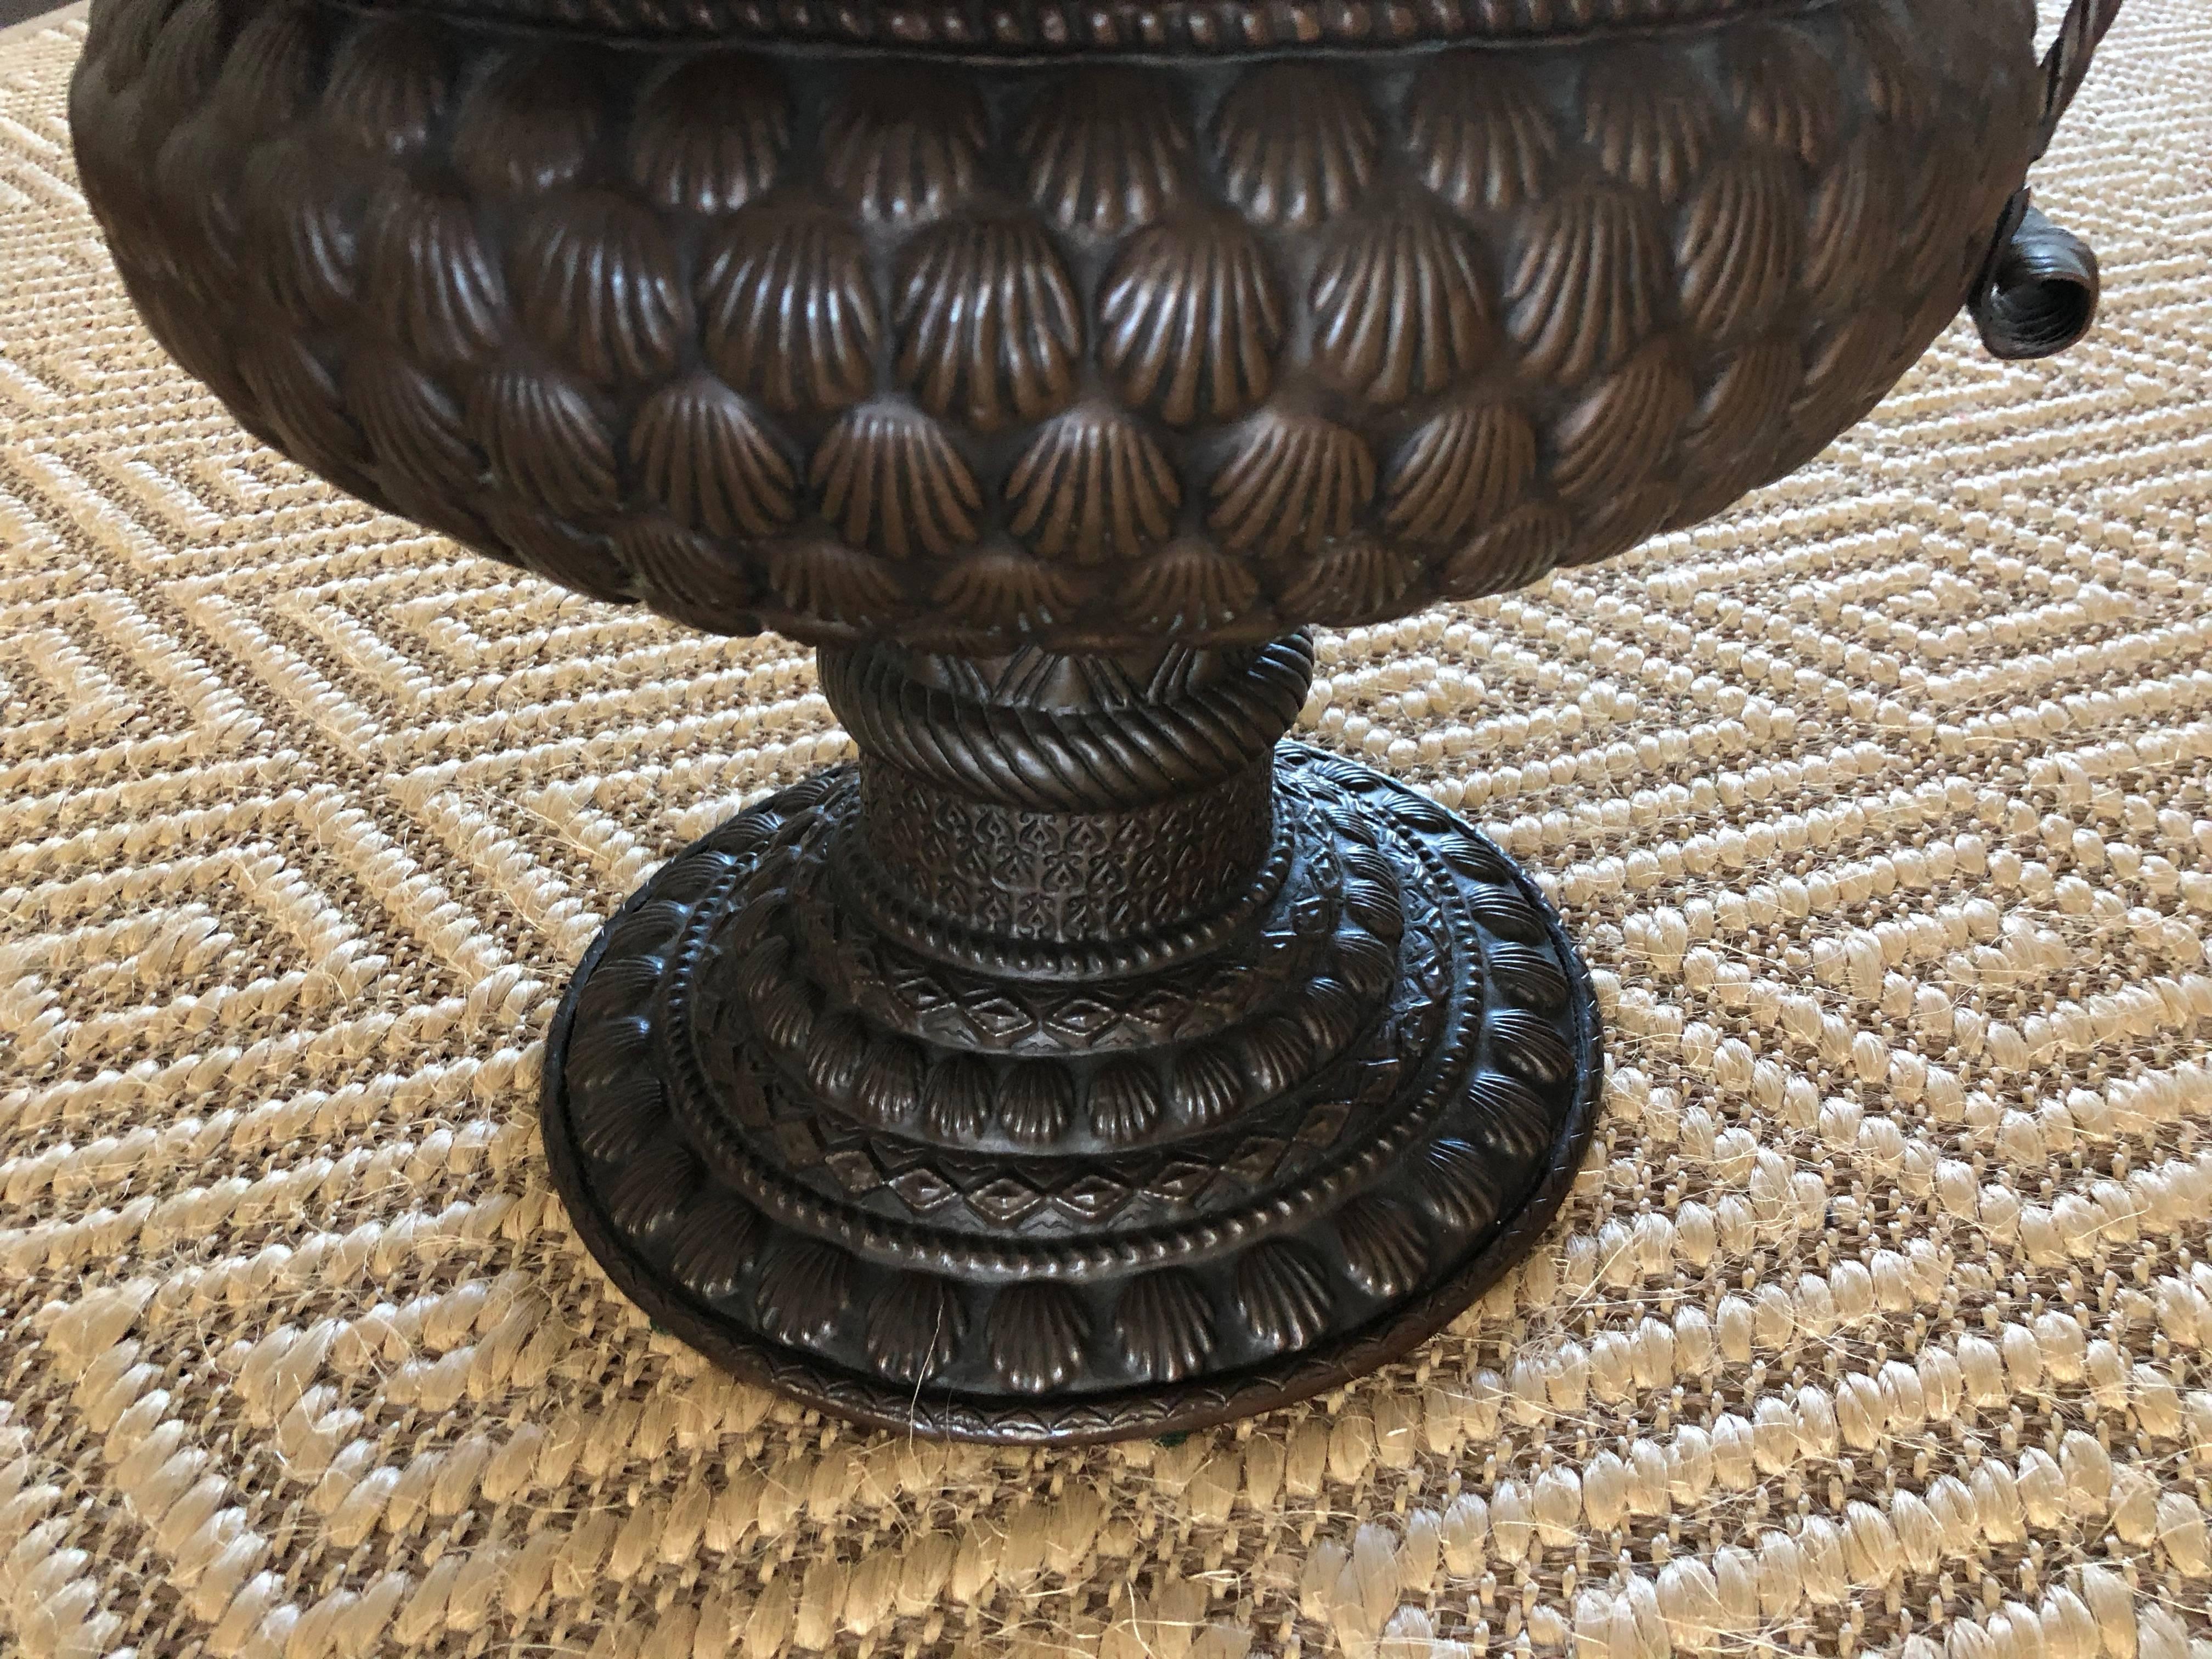 A mid-17th century Dutch copper vase or container hand made with a shell embossed designed is a goblet shaped piece. The bulbous bowl embossed with shells has a stem with rope-like knotted handles supported on a shell embossed stepped foot wonderful